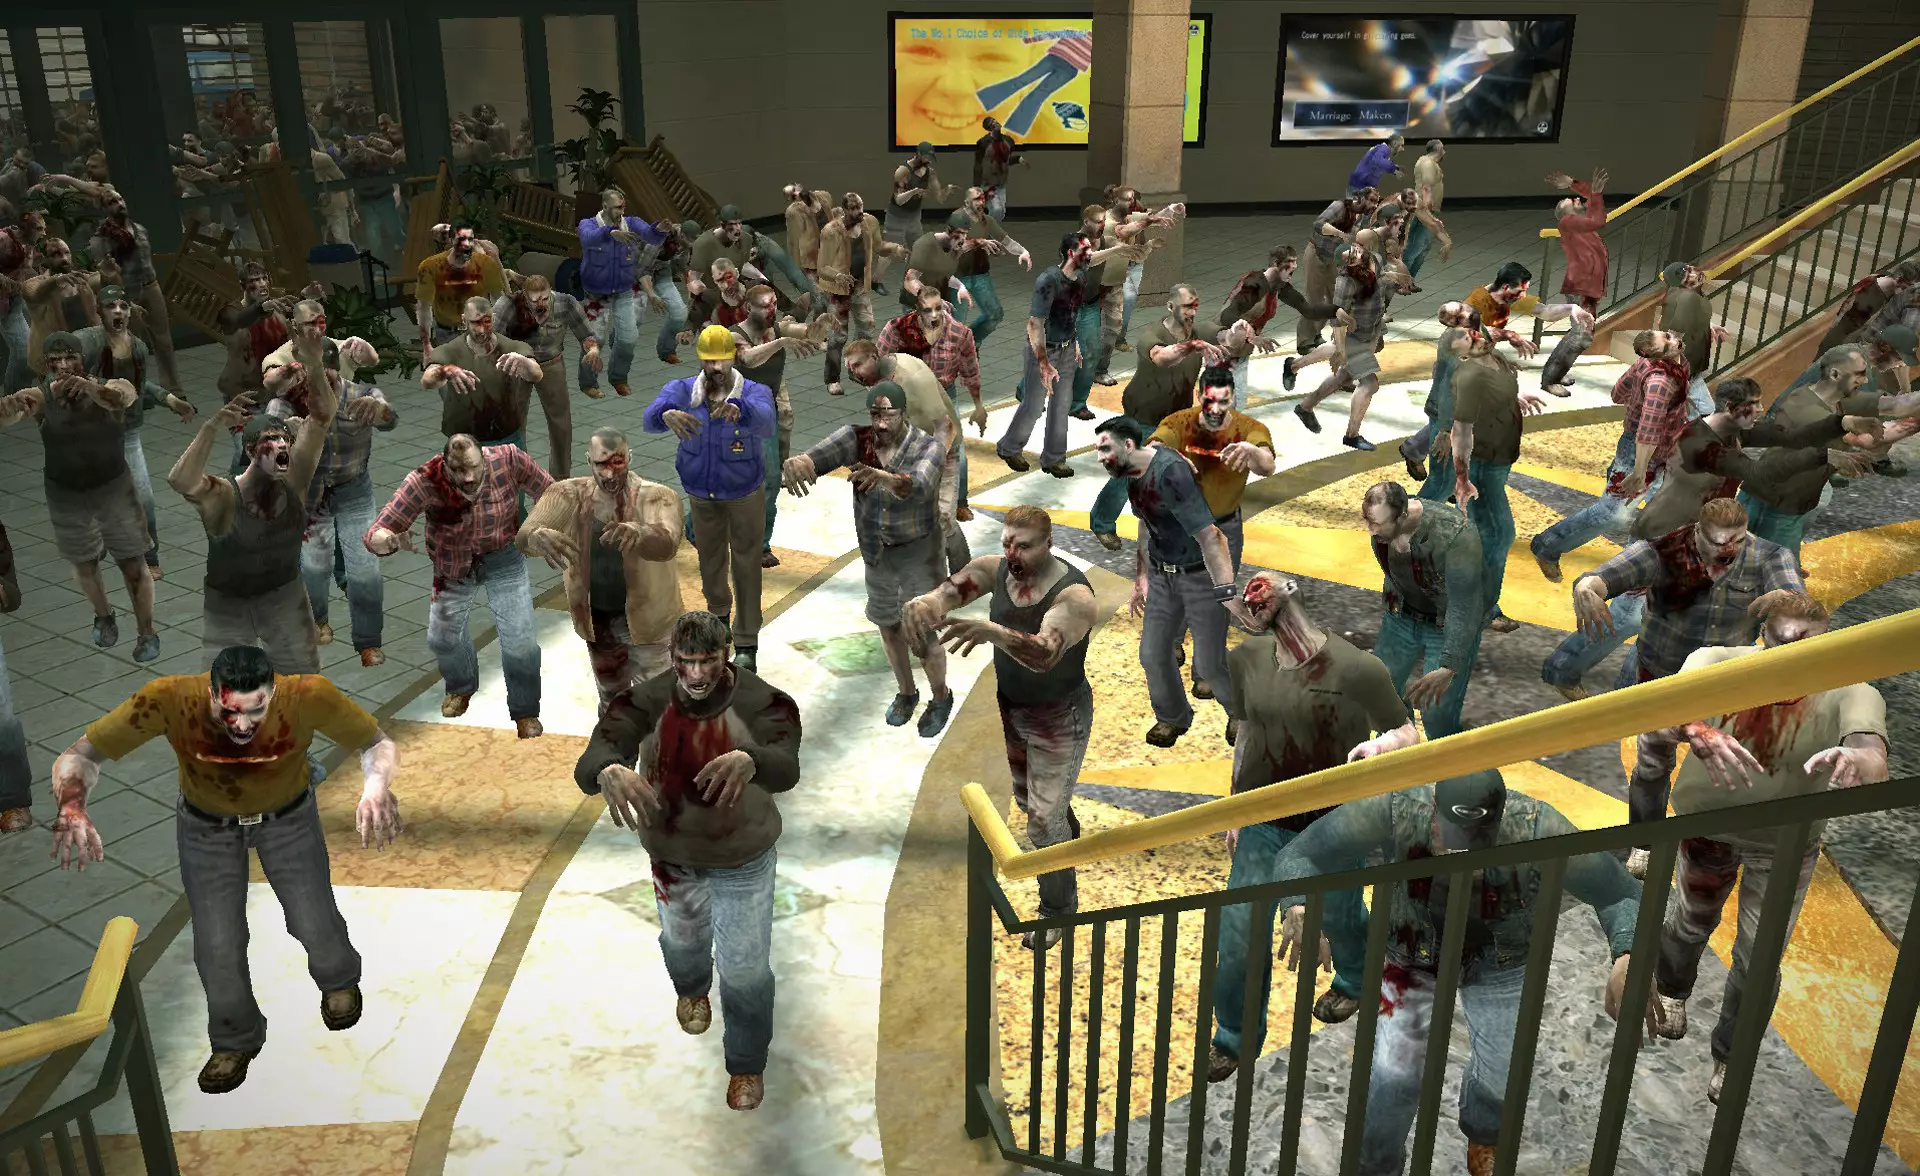 'Dead Rising' was an HD-gen game that wasn't easily playable by those with vision disabilities /